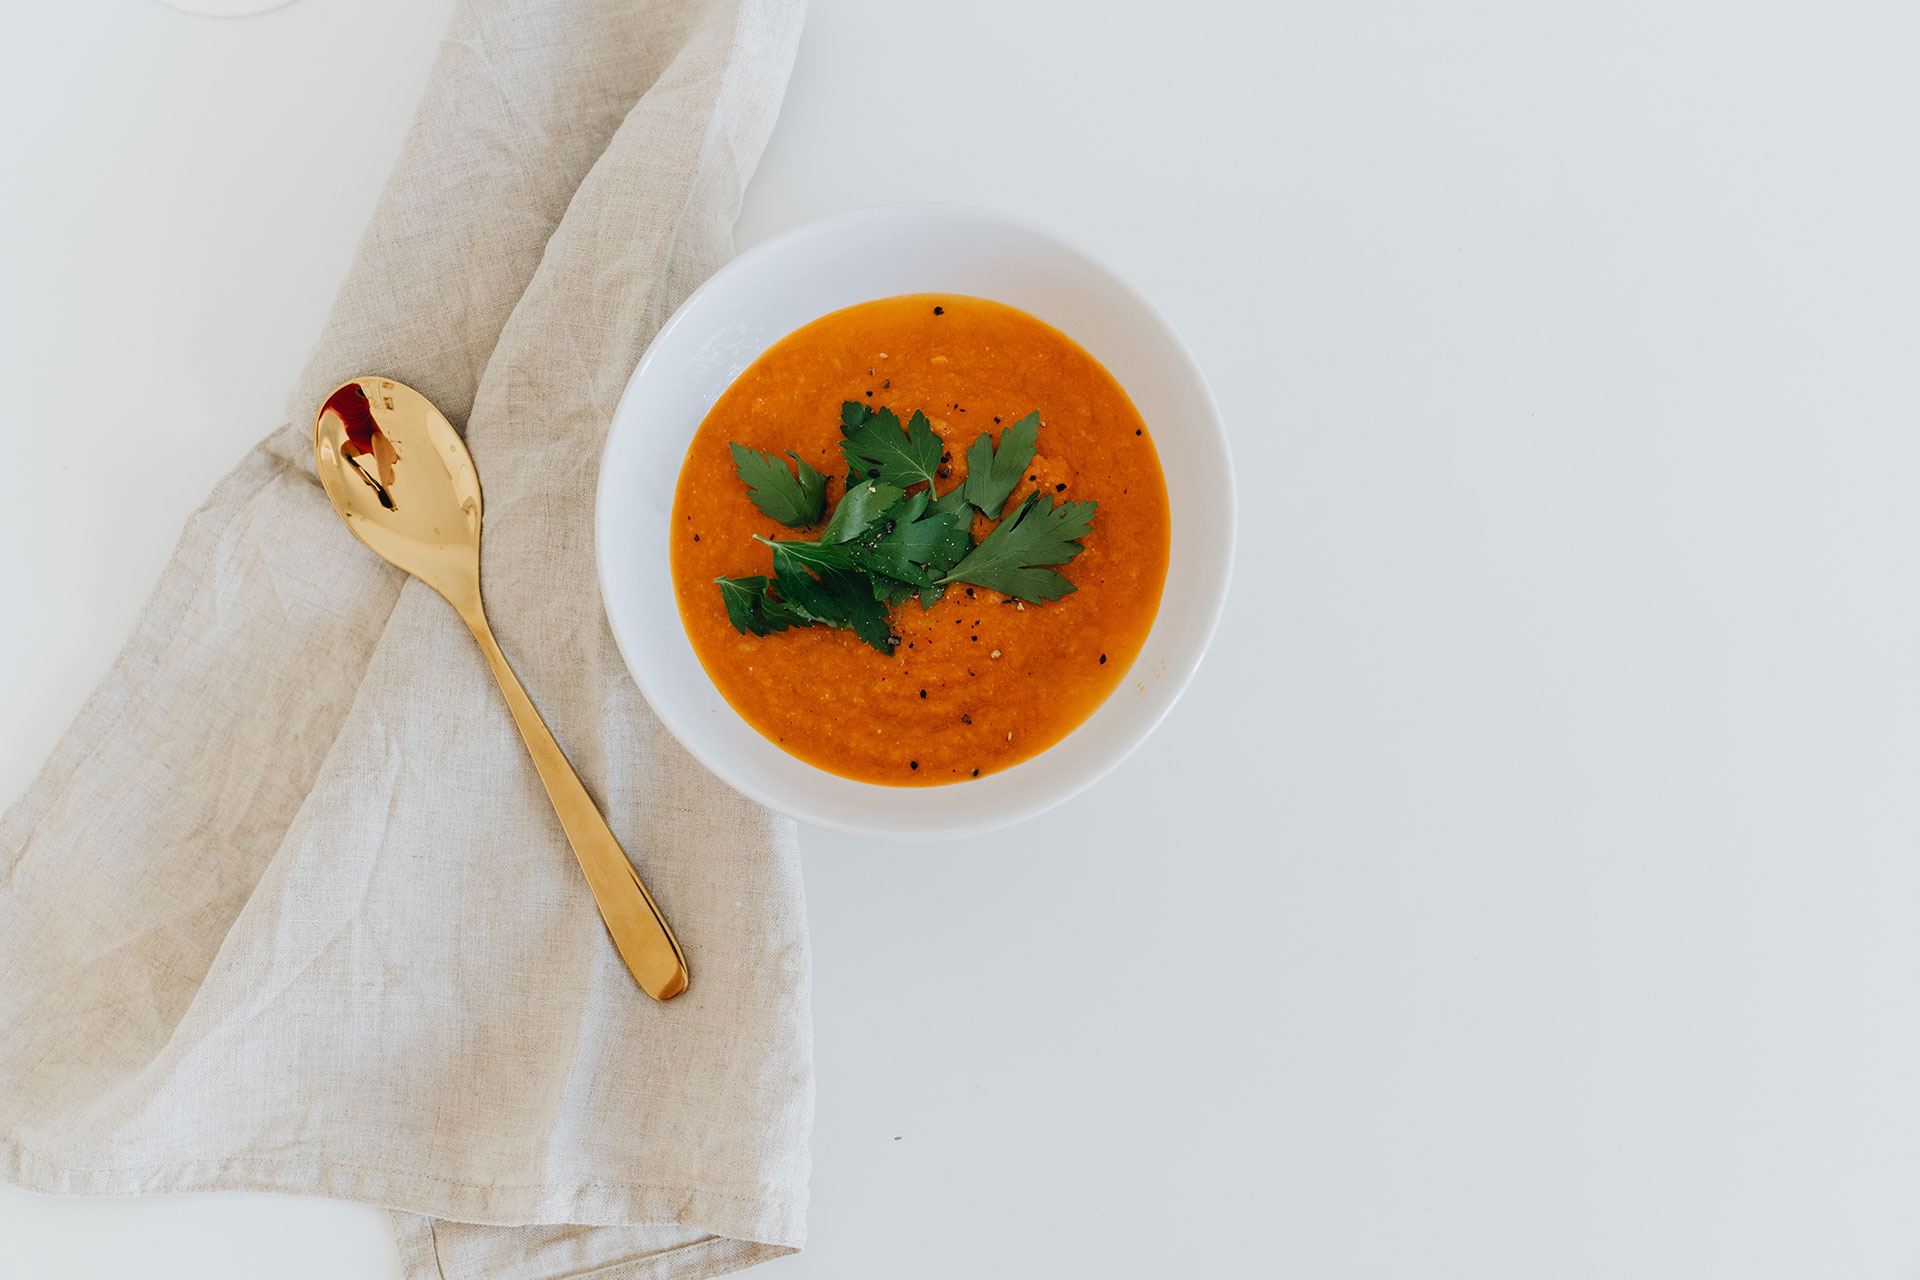 Healthy recipe to make soup and make it delicious